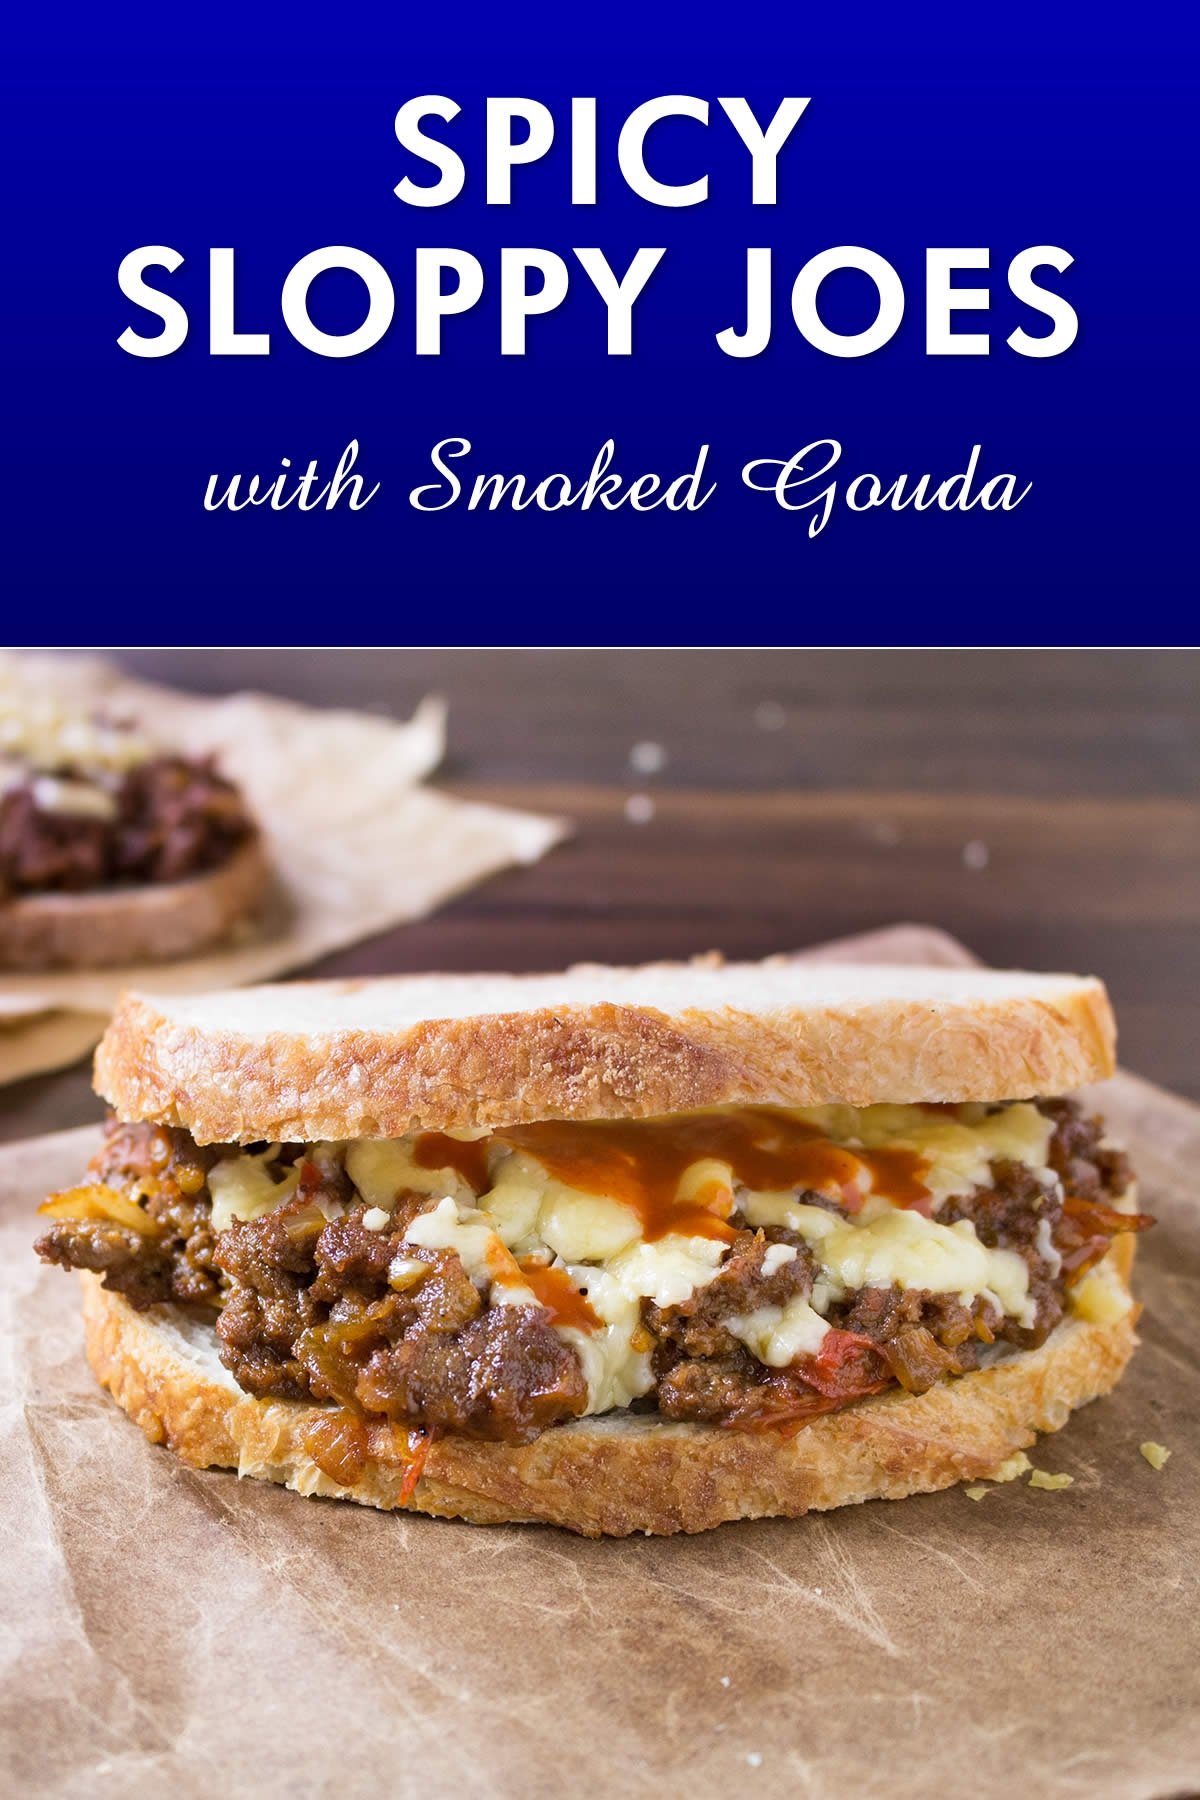 Spicy Sloppy Joes with Smoked Gouda - Chili Pepper Madness